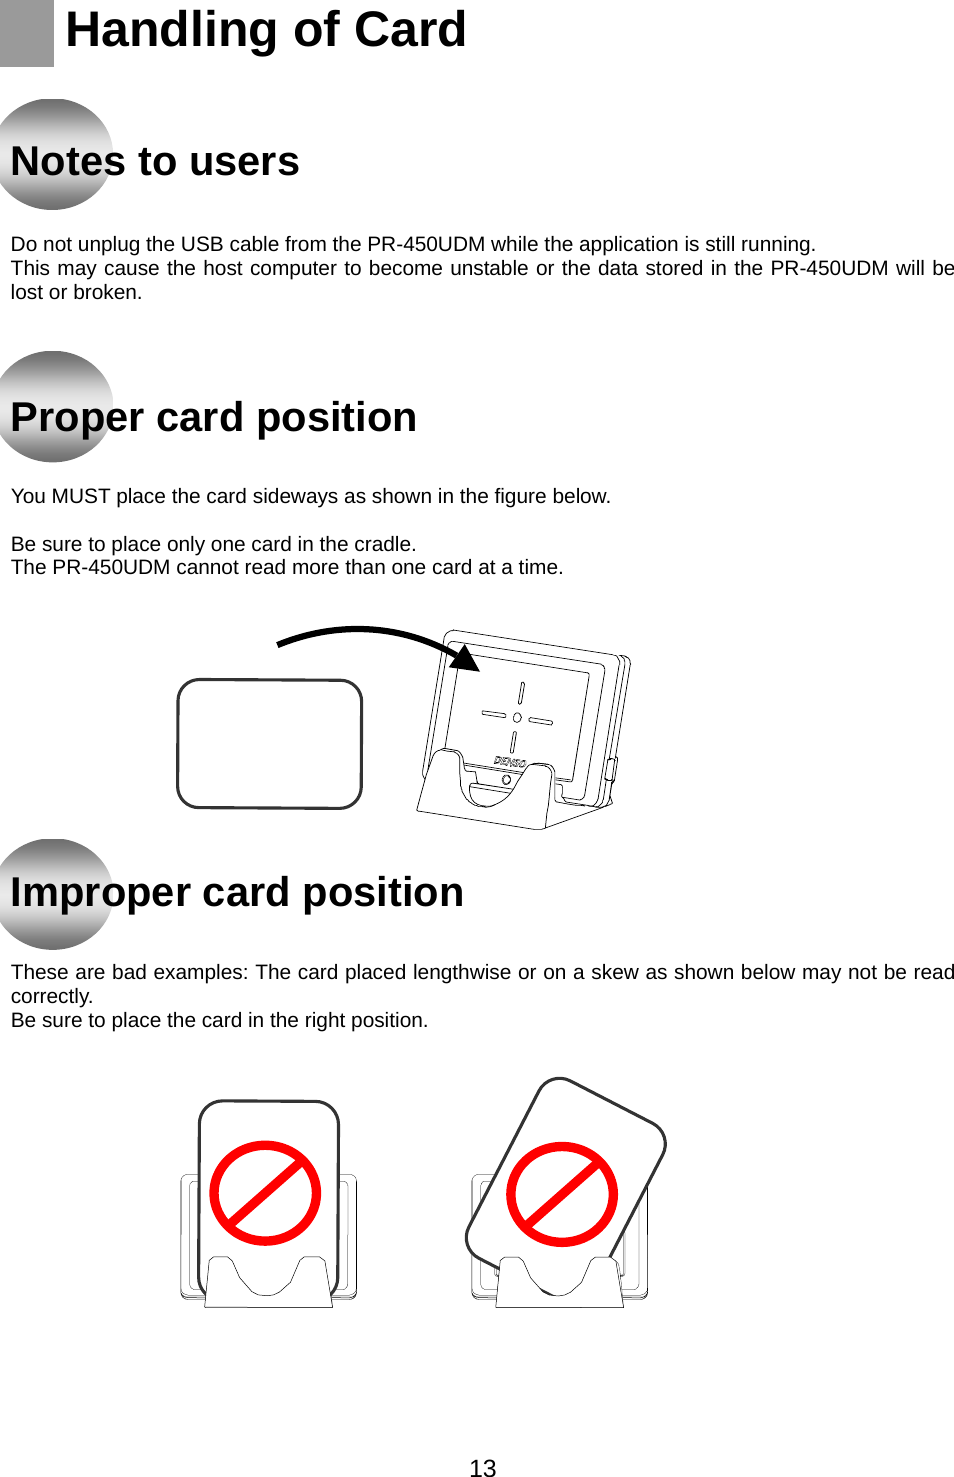    Handling of Card    Notes to users   Do not unplug the USB cable from the PR-450UDM while the application is still running. This may cause the host computer to become unstable or the data stored in the PR-450UDM will be lost or broken.     Proper card position   You MUST place the card sideways as shown in the figure below.  Be sure to place only one card in the cradle. The PR-450UDM cannot read more than one card at a time.              Improper card position   These are bad examples: The card placed lengthwise or on a skew as shown below may not be read correctly. Be sure to place the card in the right position.       13